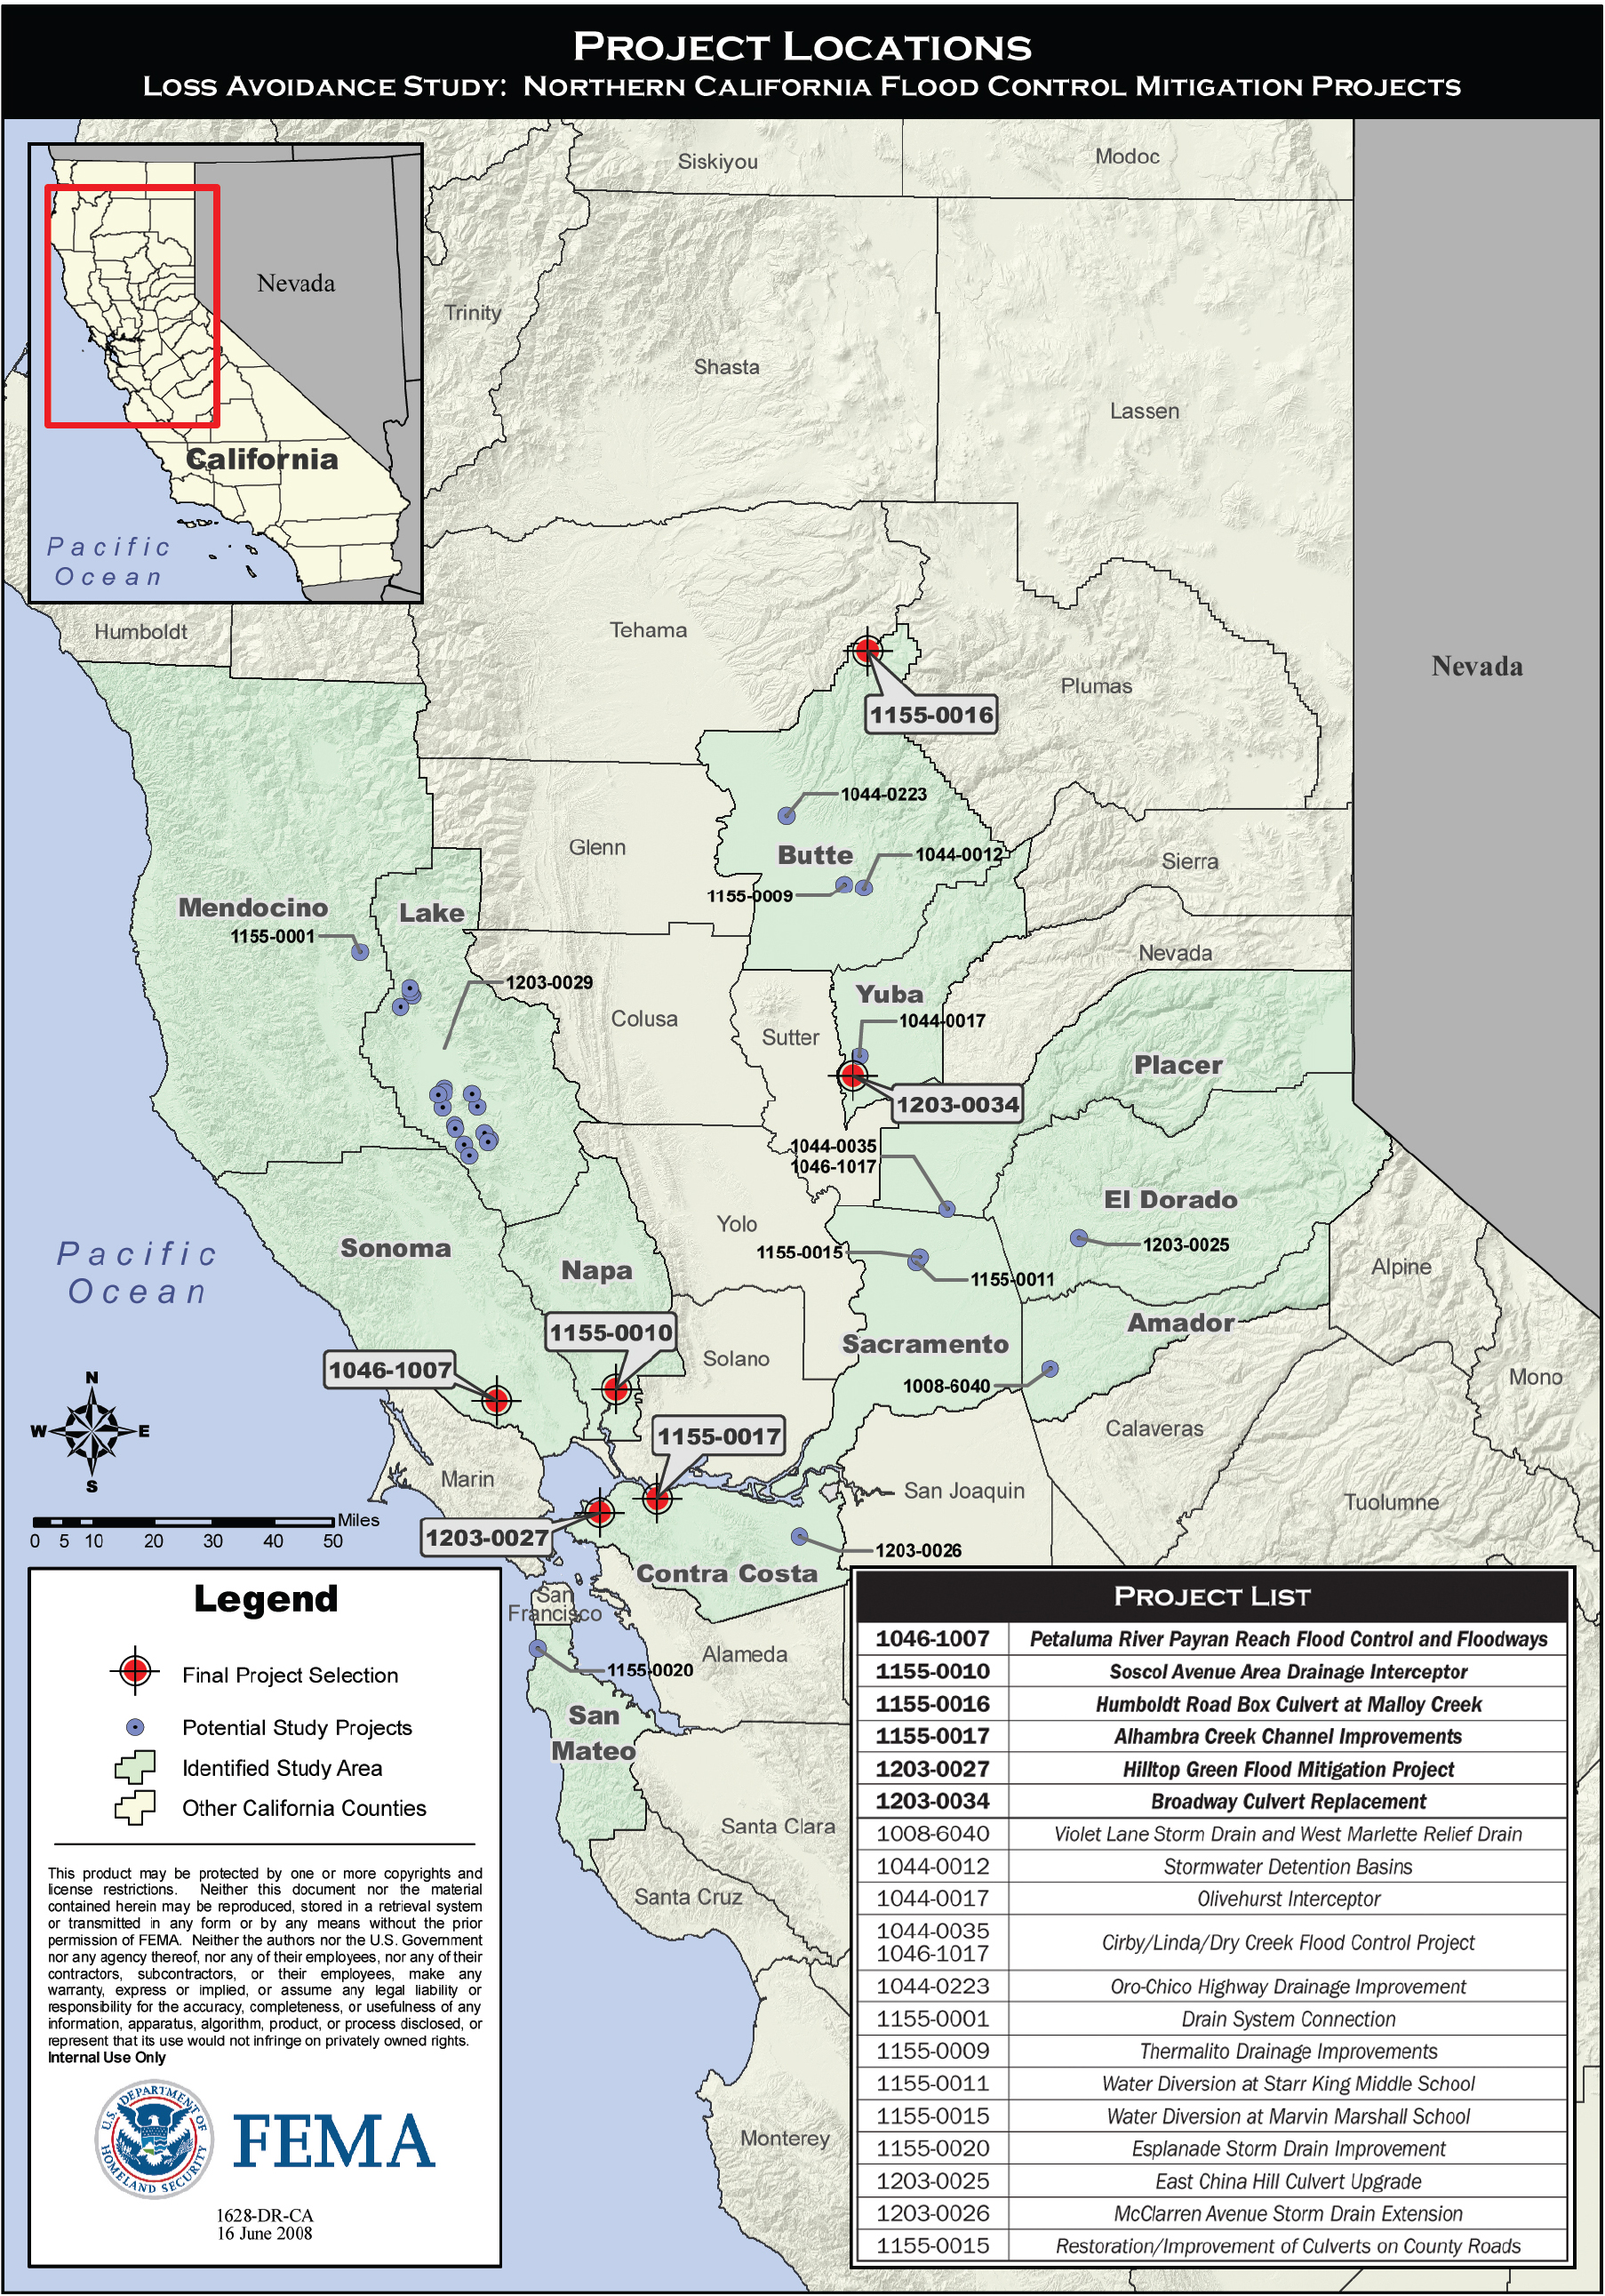 Project Locations. Loss Avoidance Study: Northern California Flood Control Mitigation Projects.